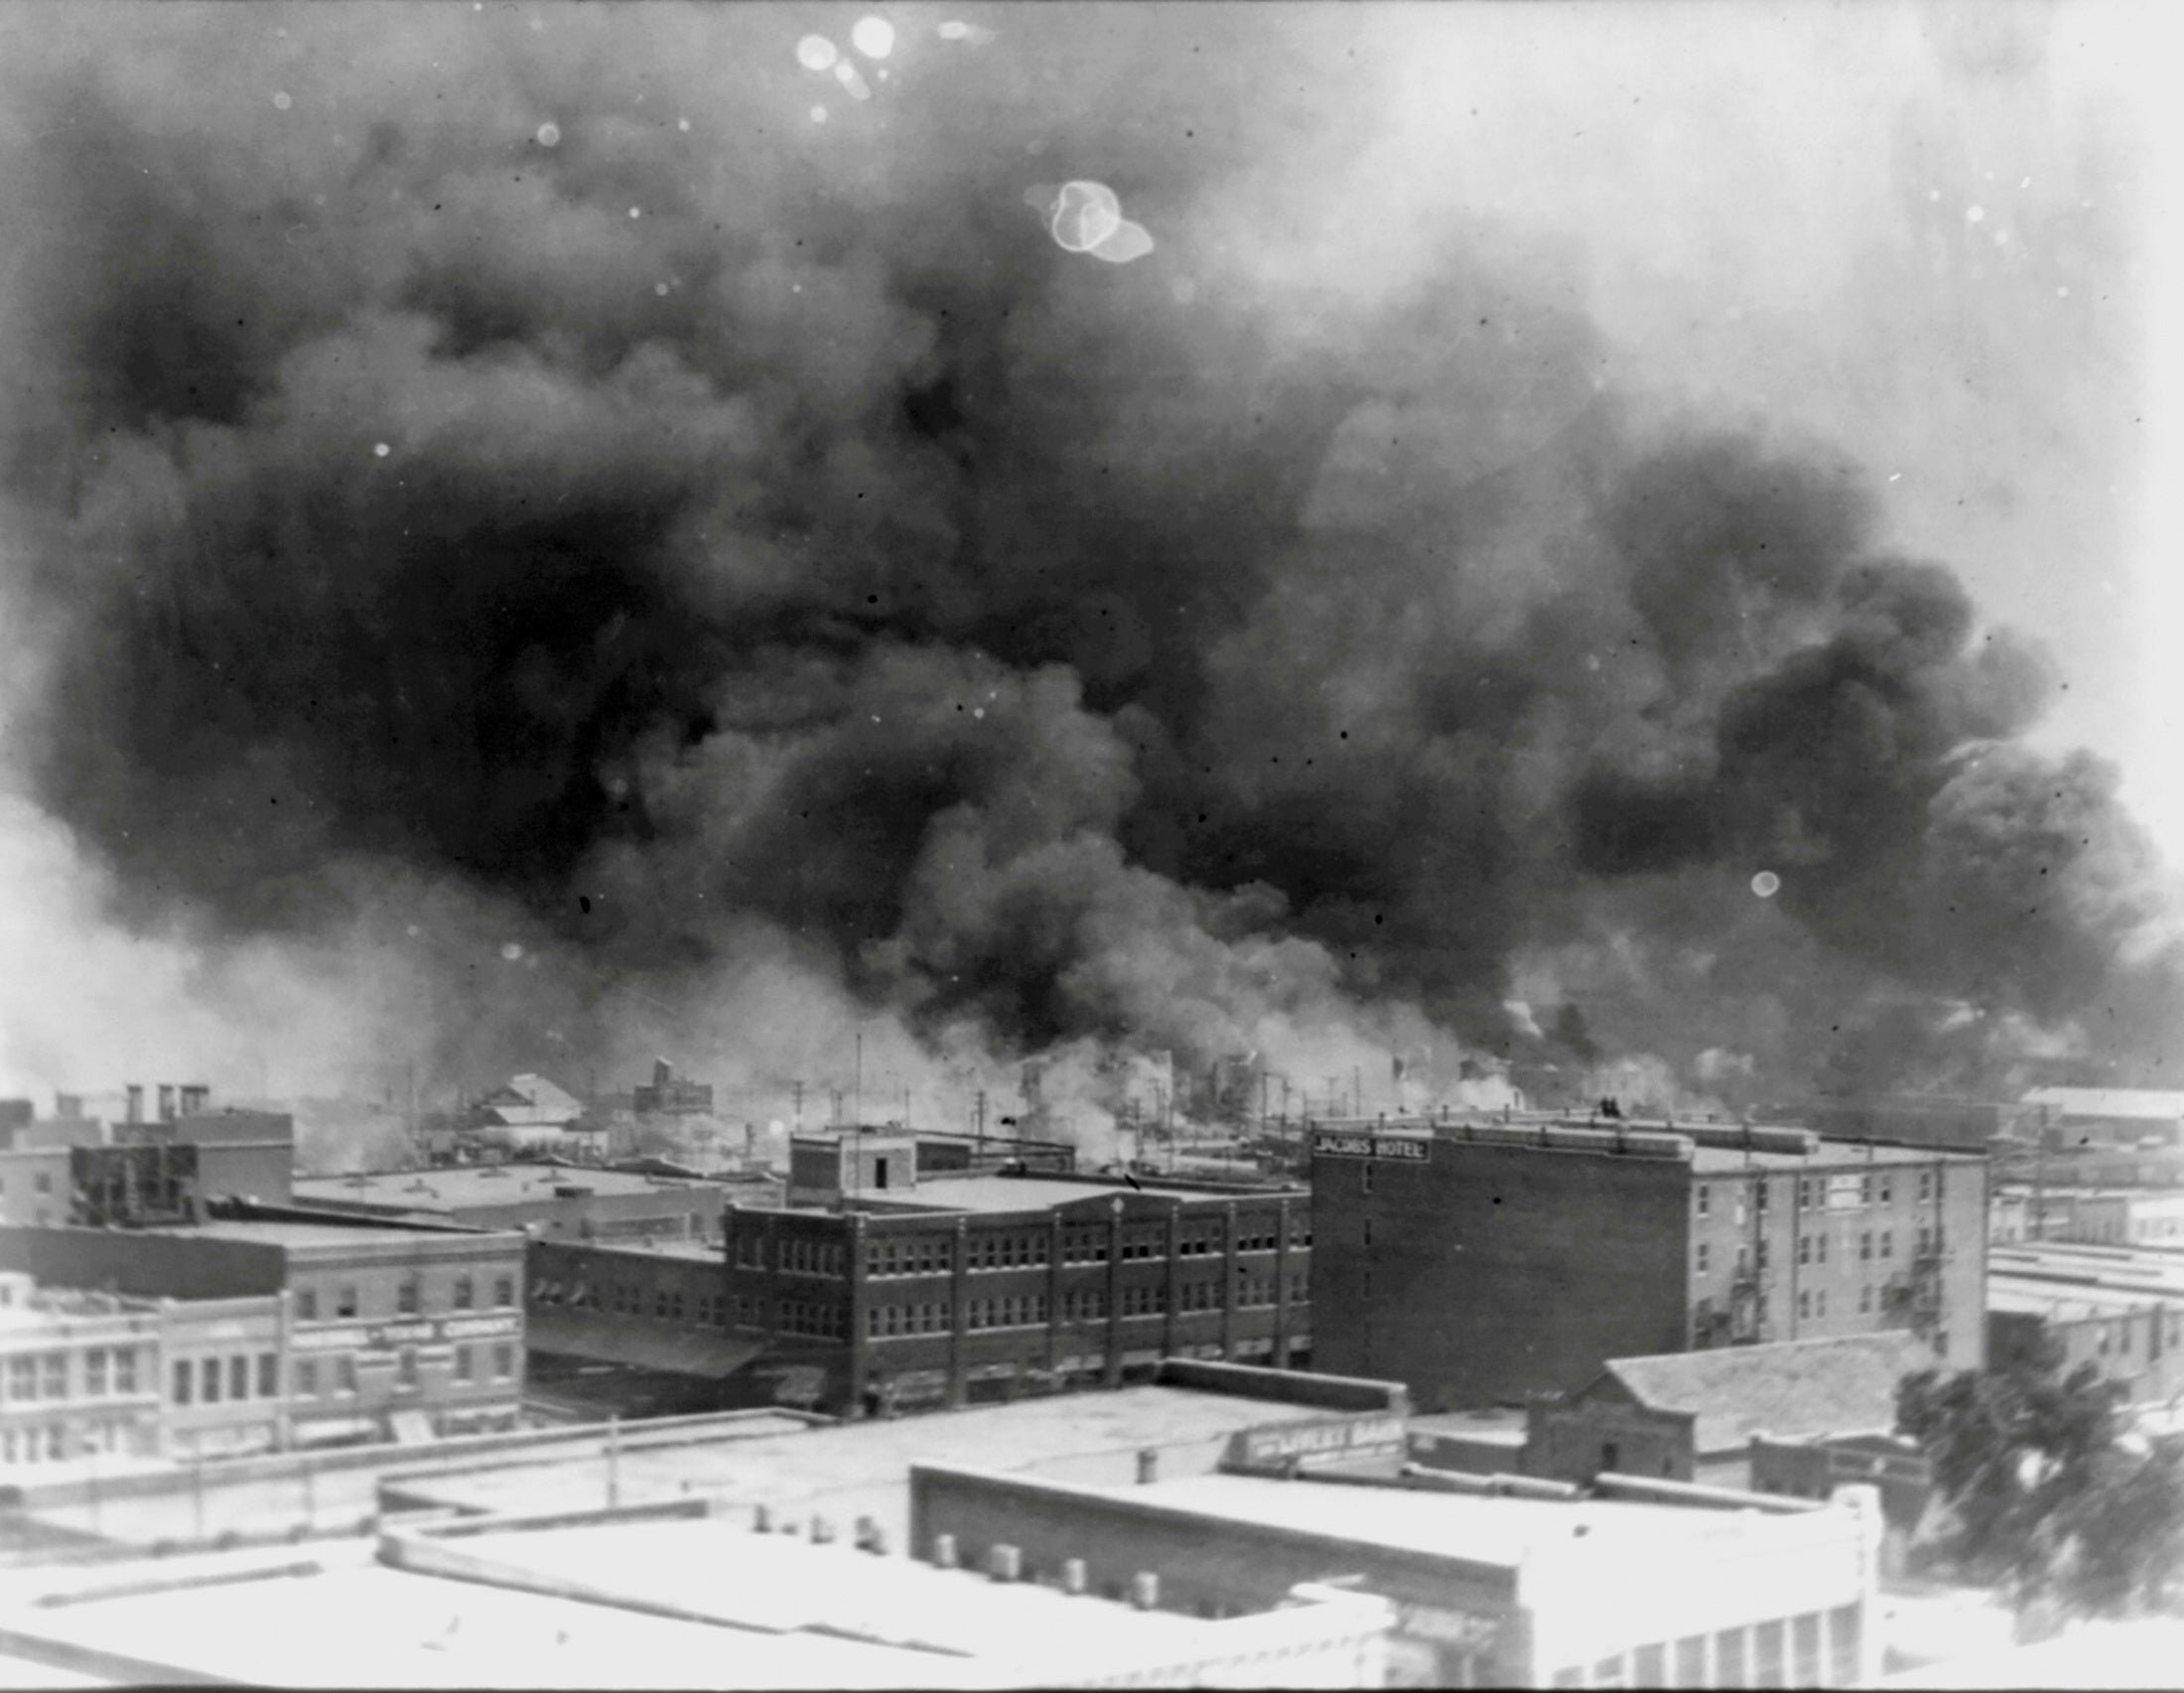 A white mob killed as many as 300 people and bombed a thriving Black community in Tulsa, Oklahoma in 1921.